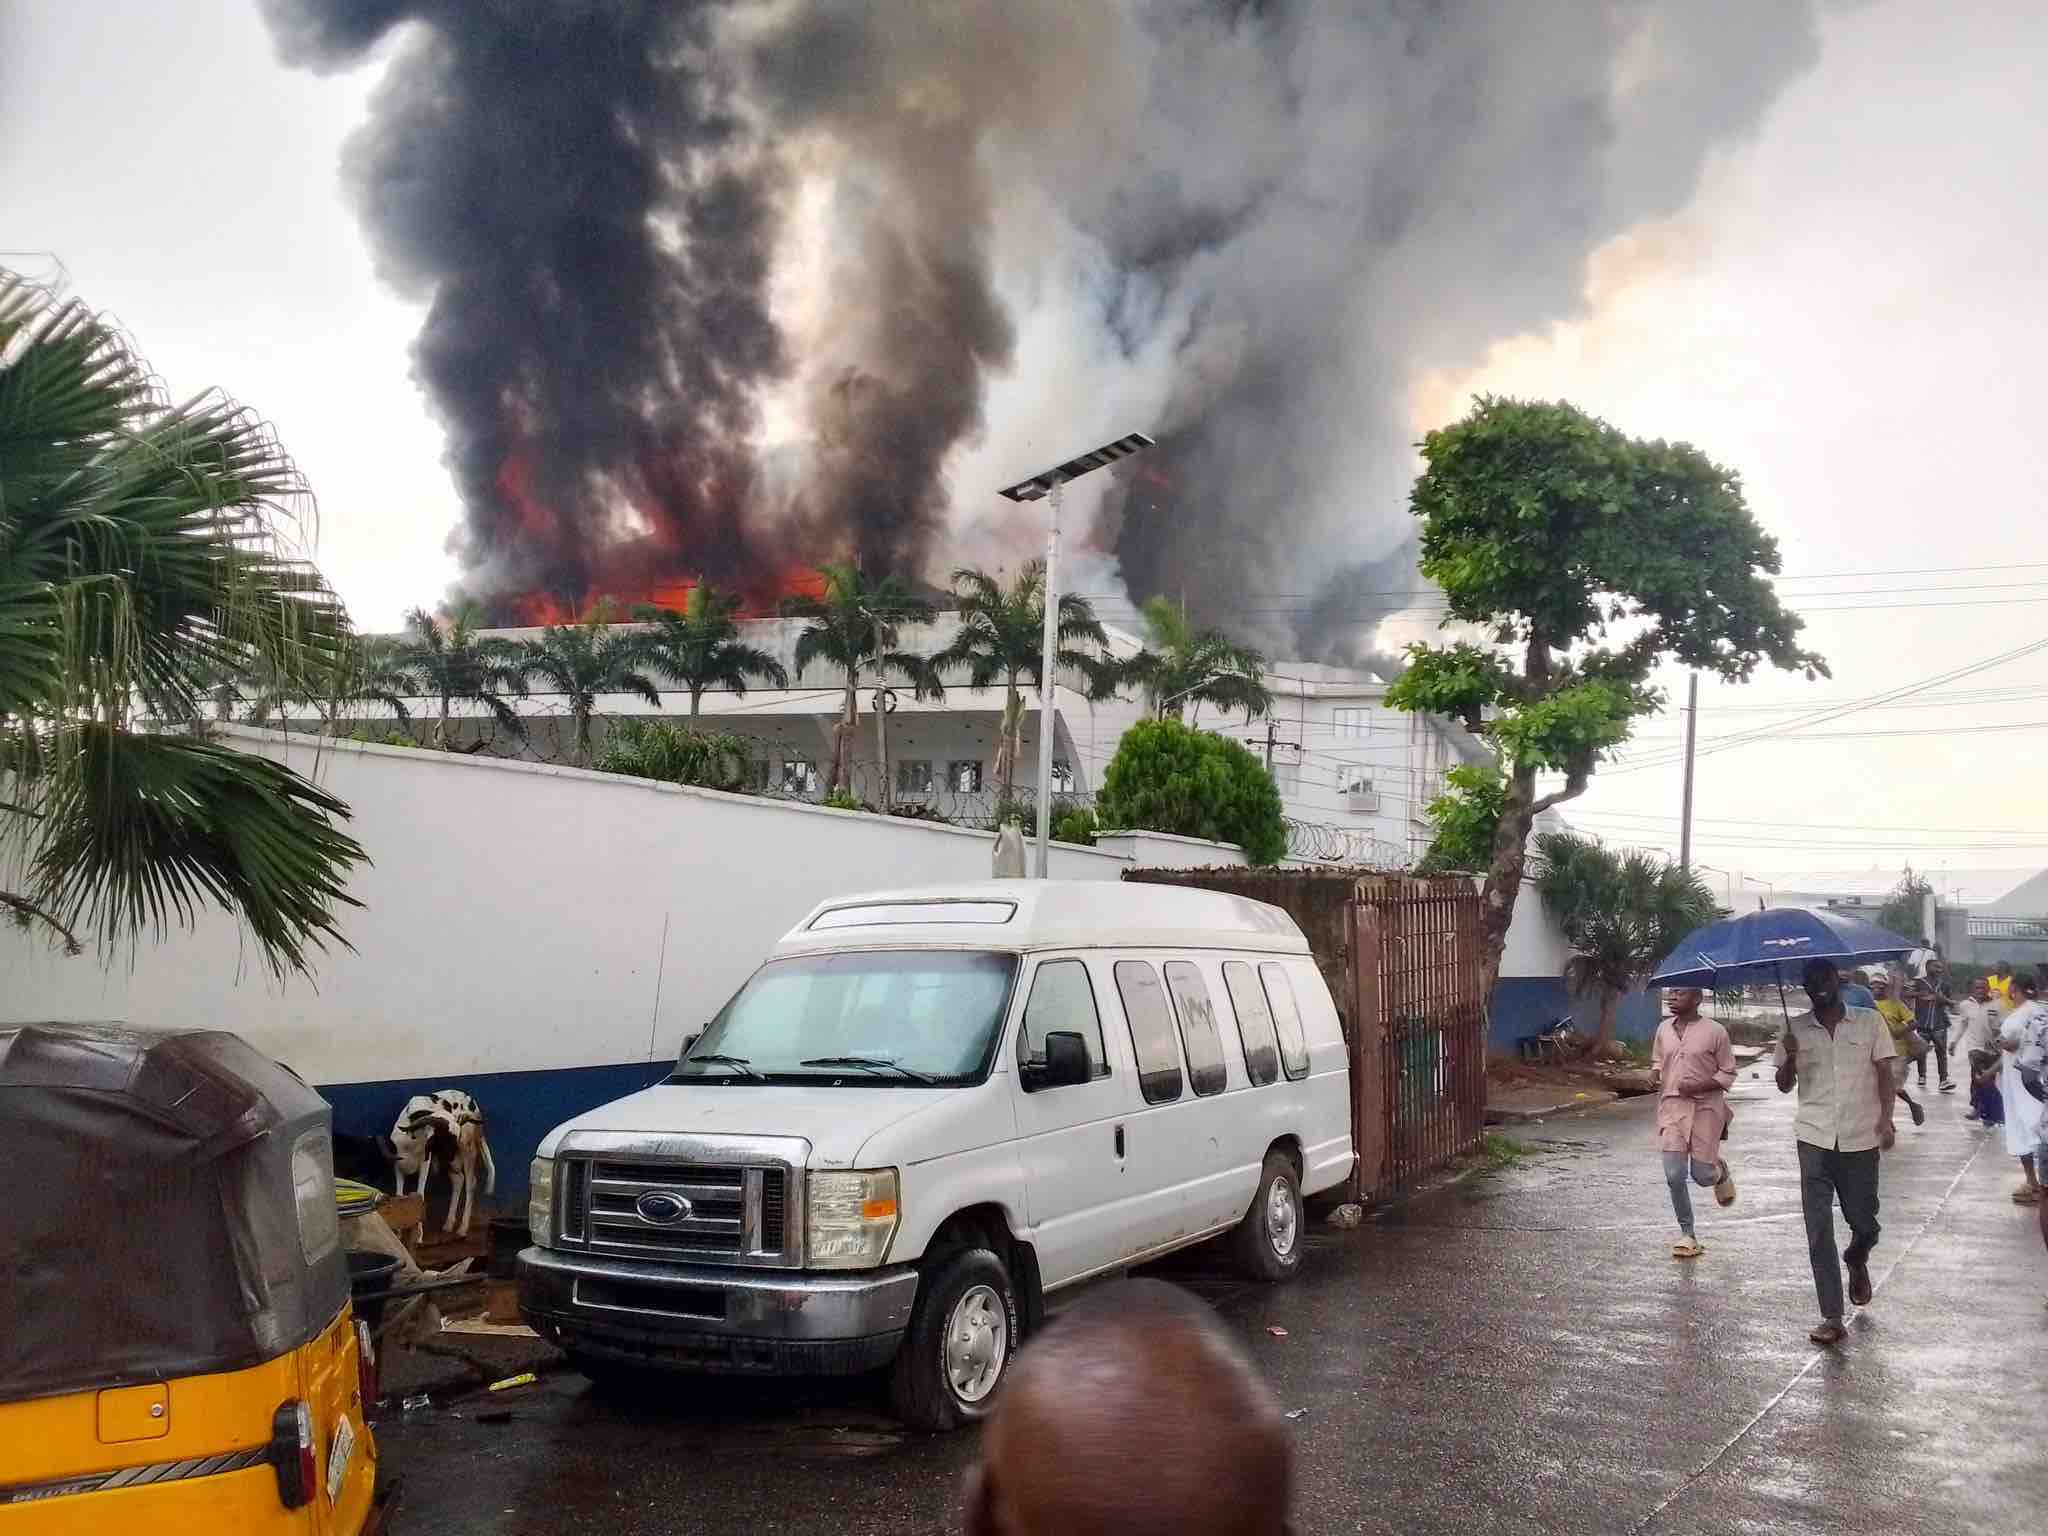 Pastor Chris vows to rebuild a better structure as fire razes Christ Embassy church